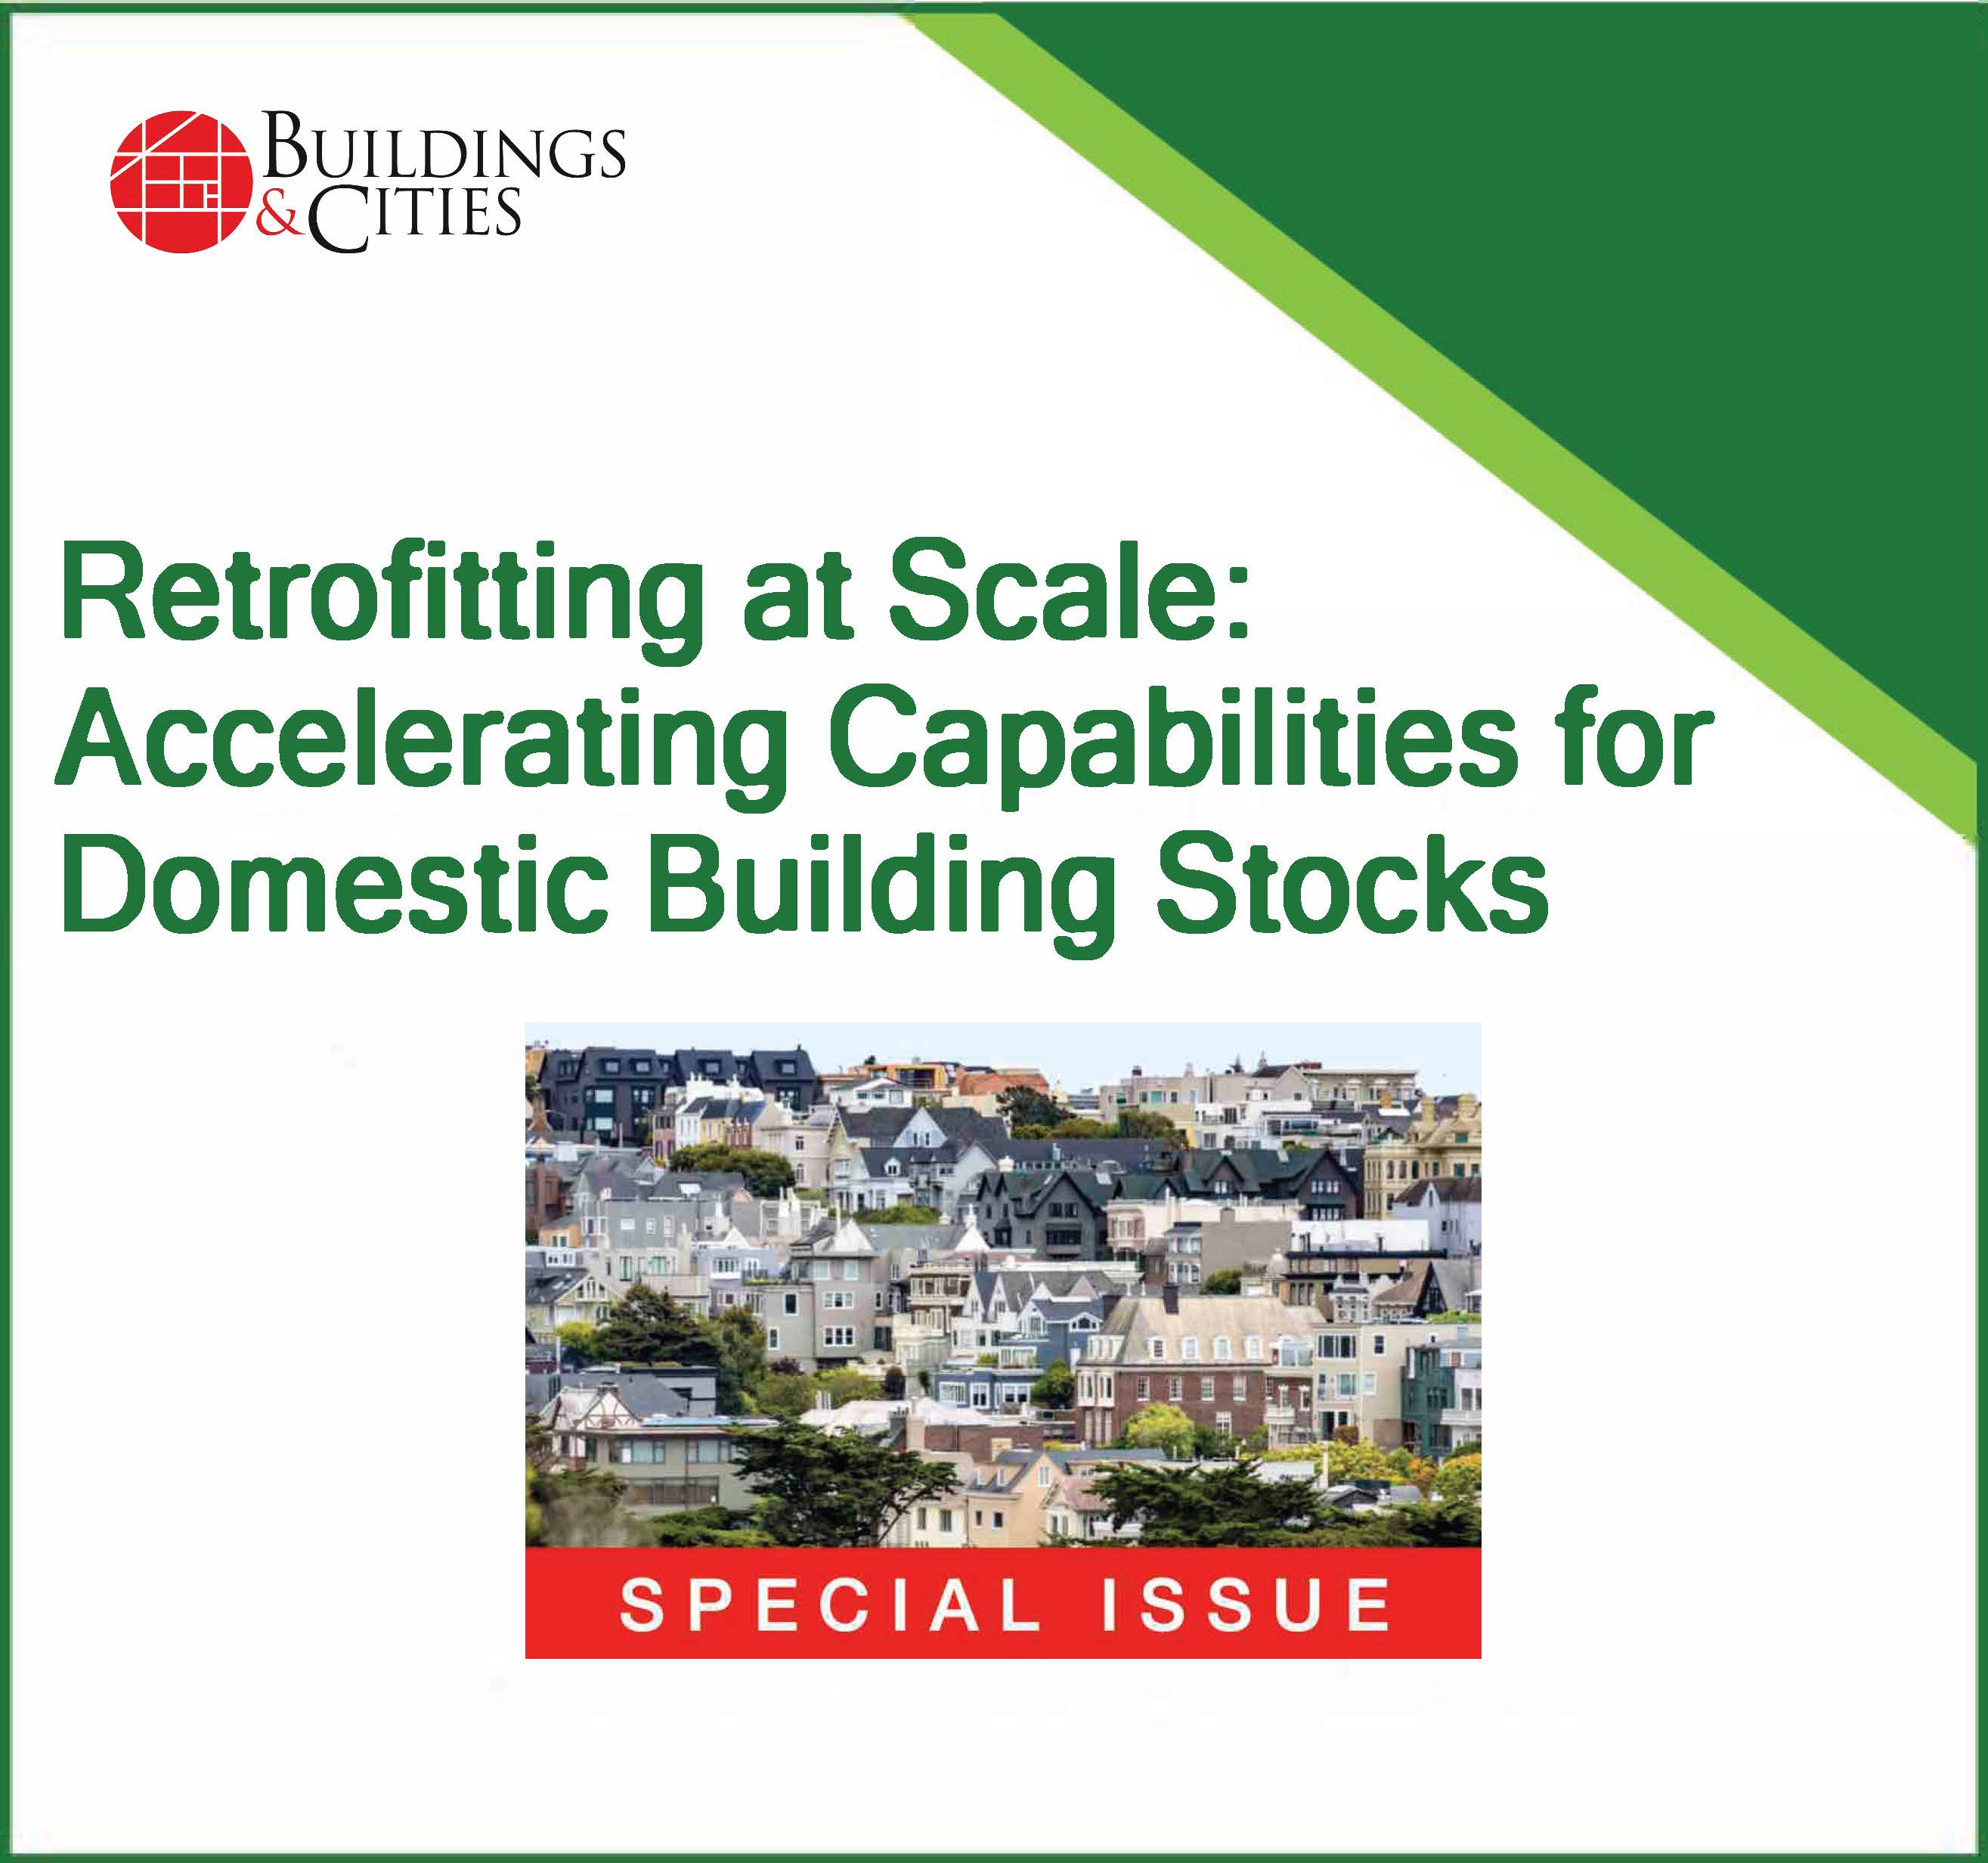 Retrofitting at Scale: Accelerating Capabilities for Domestic Building Stocks